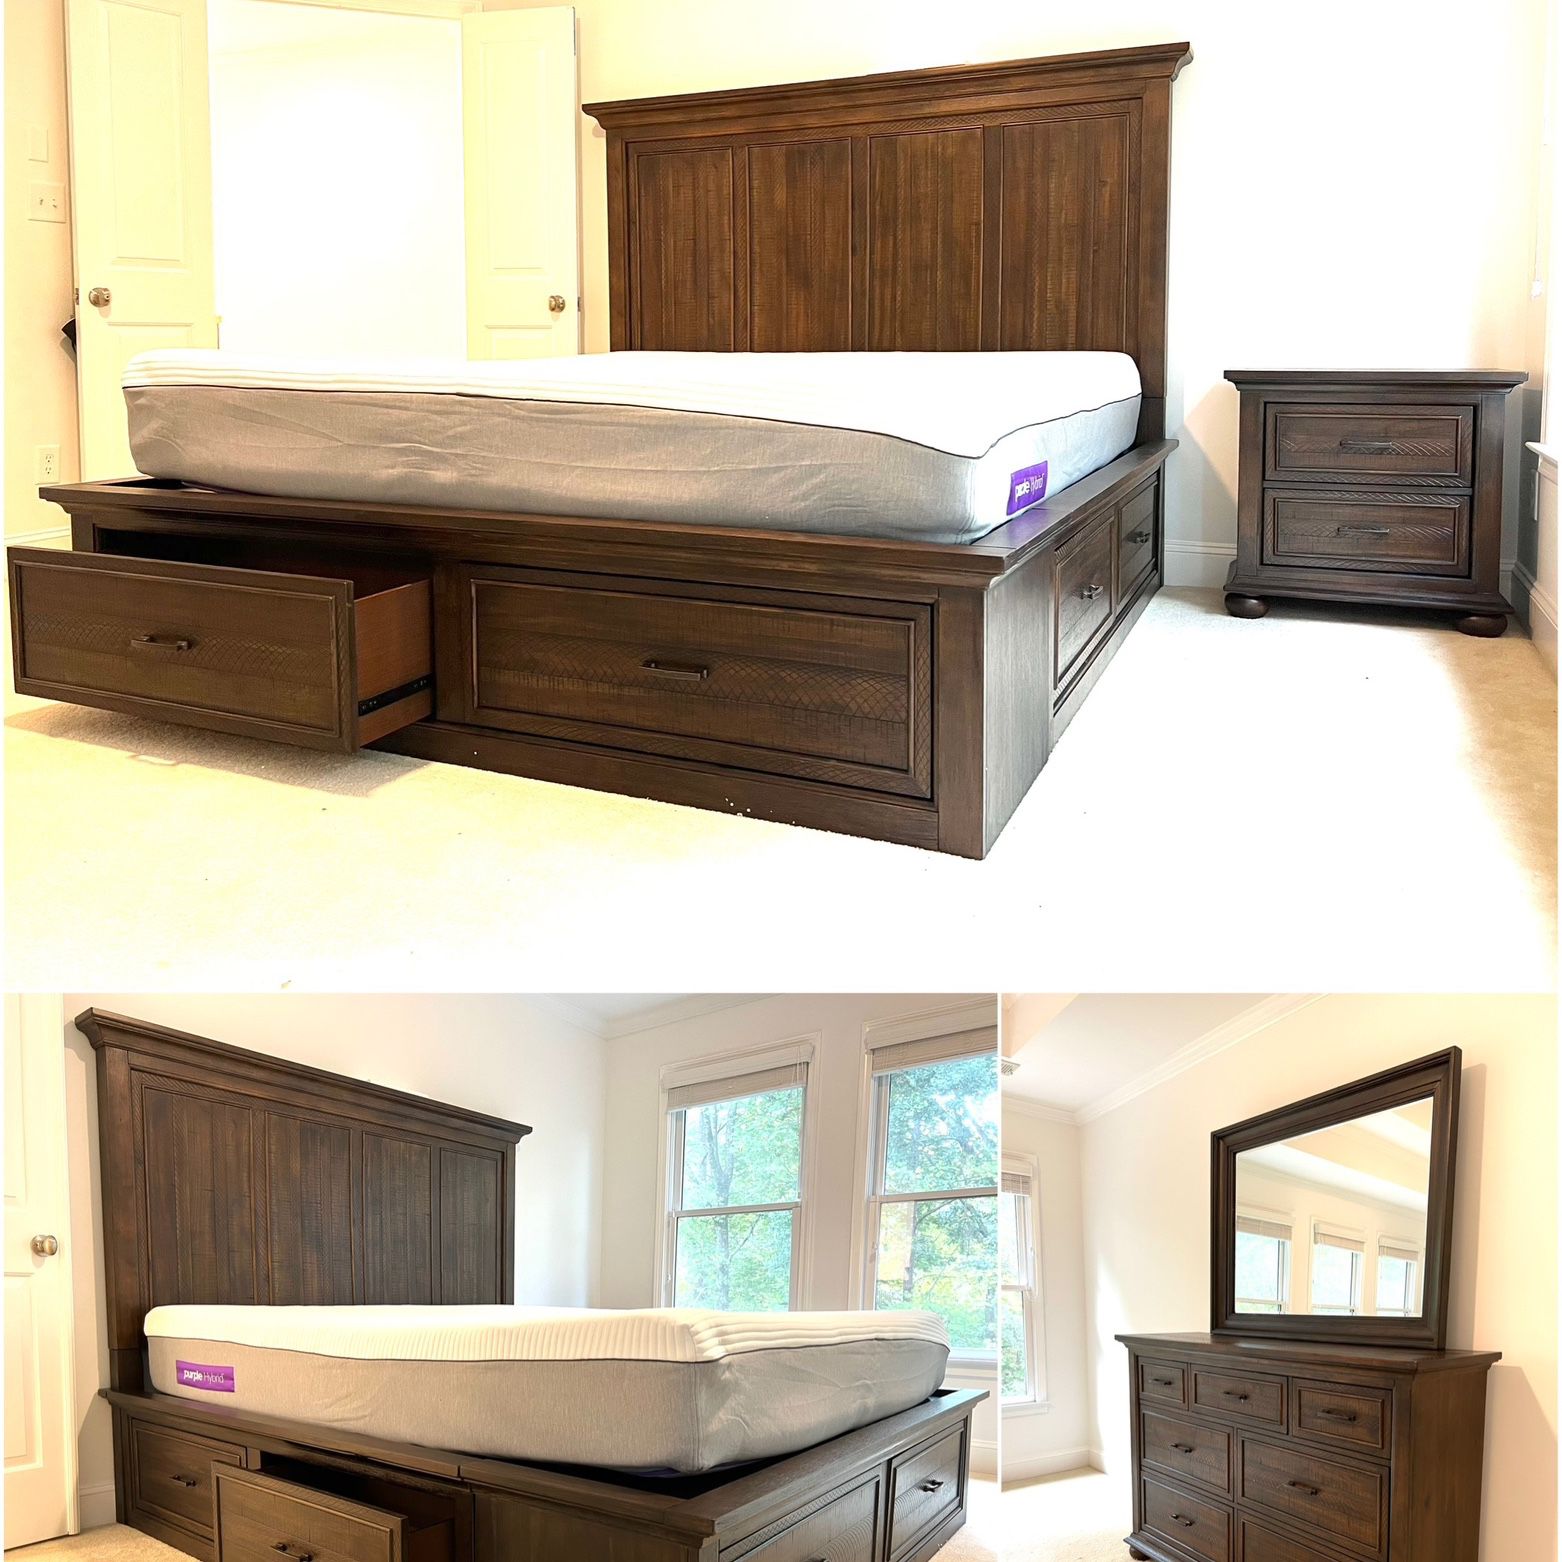 BRAND NEW SOLID STORAGE KING SIZE BEDROOM SET $1645! QUEEN SIZE $1545!..PRICE INCLUDES DELIVERY!!!  We make luxury furniture affordable!!!  